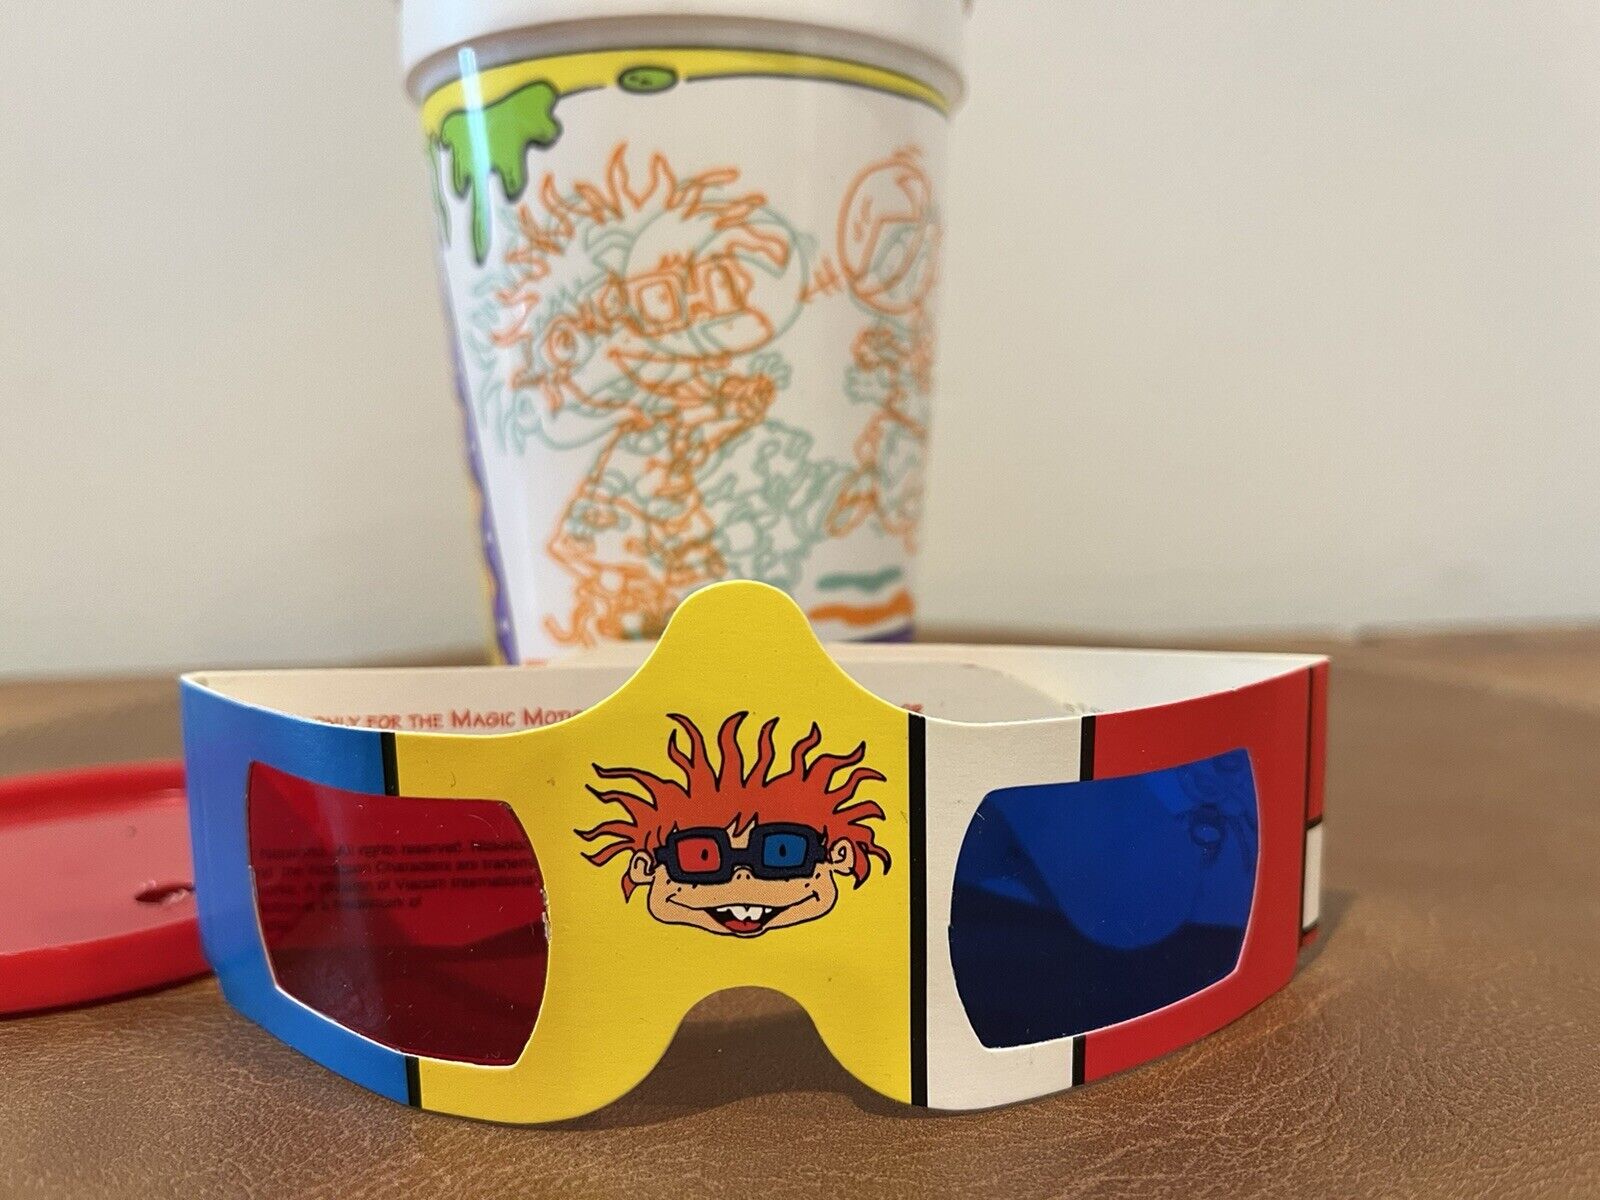 1991 Rugrats 3D Nickelodeon Cup With Original 3D Glasses